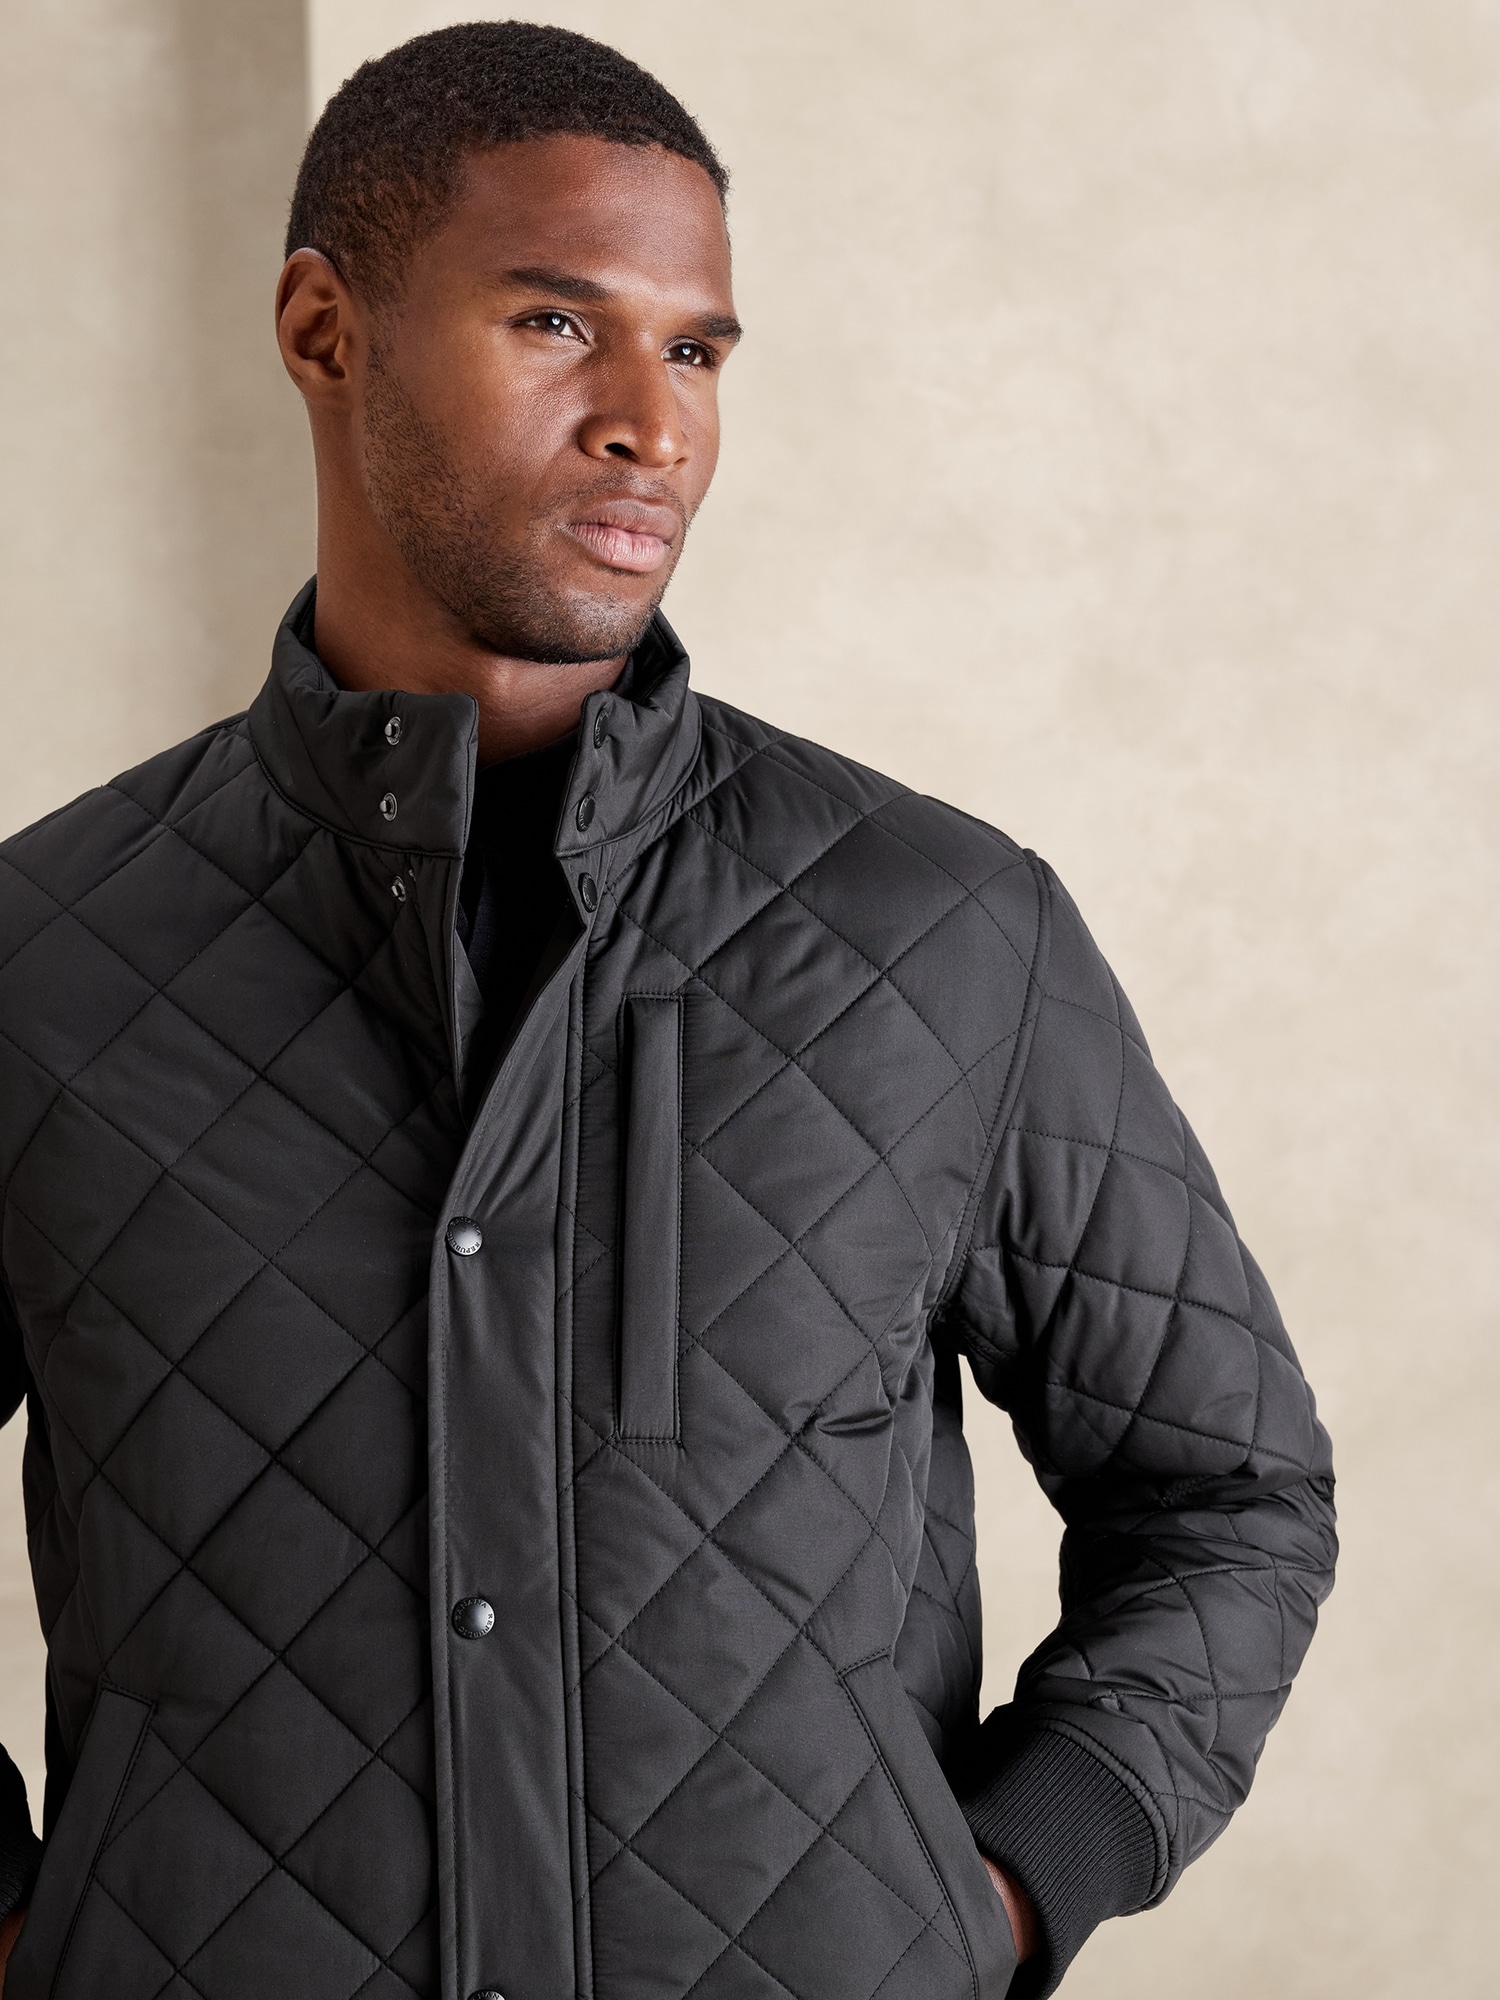 Diamond Quilted Jacket  Banana Republic Factory